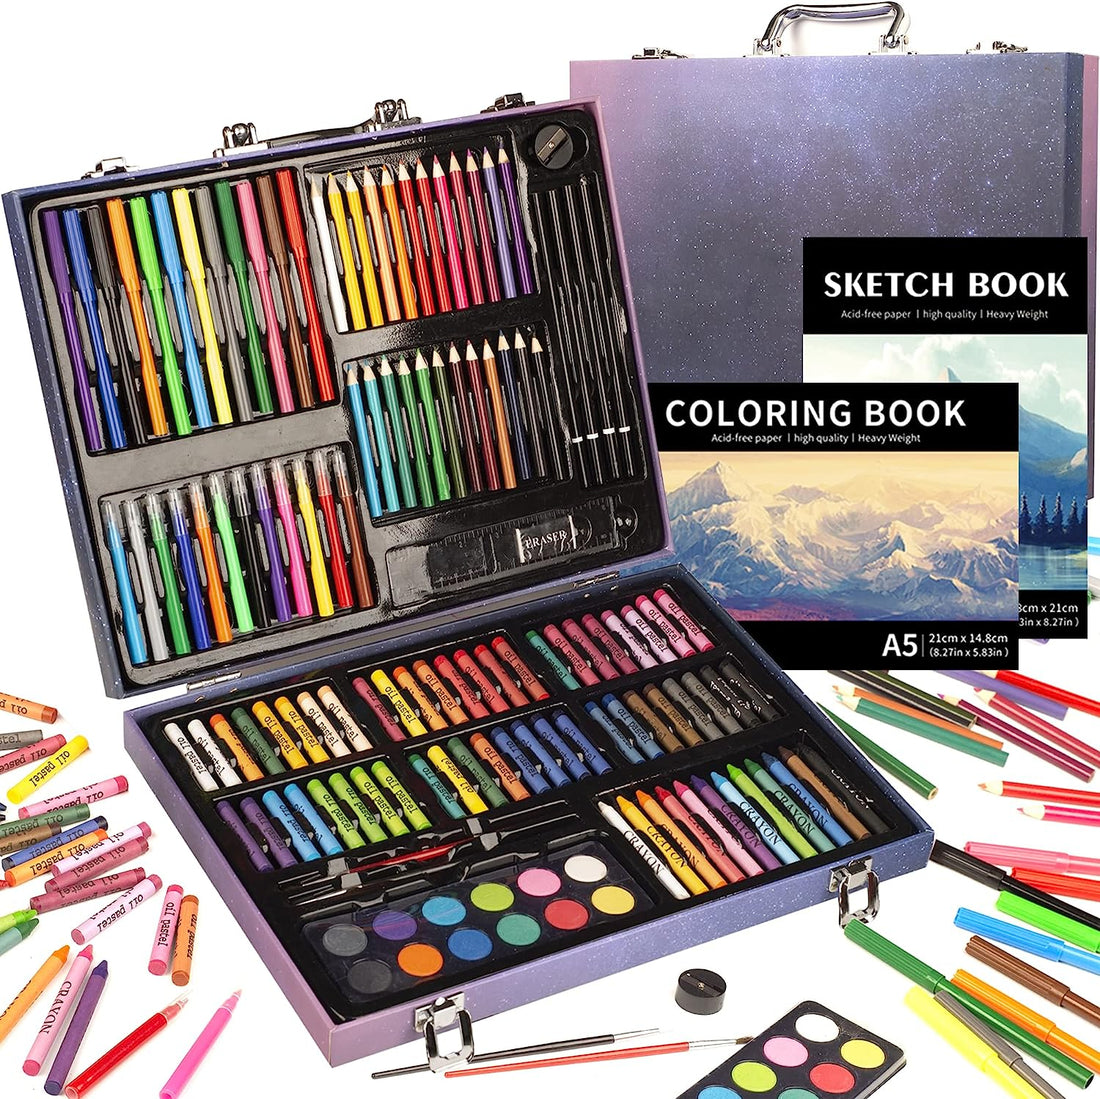 Toys & Activity :: Kinspory 150Pc Art Set with Sketch Book, Coloring Art Kit  Drawing Art Supplies Case, Markers Crayon Colour Pencils for Budding  Artists Kids Teens Boys -Black